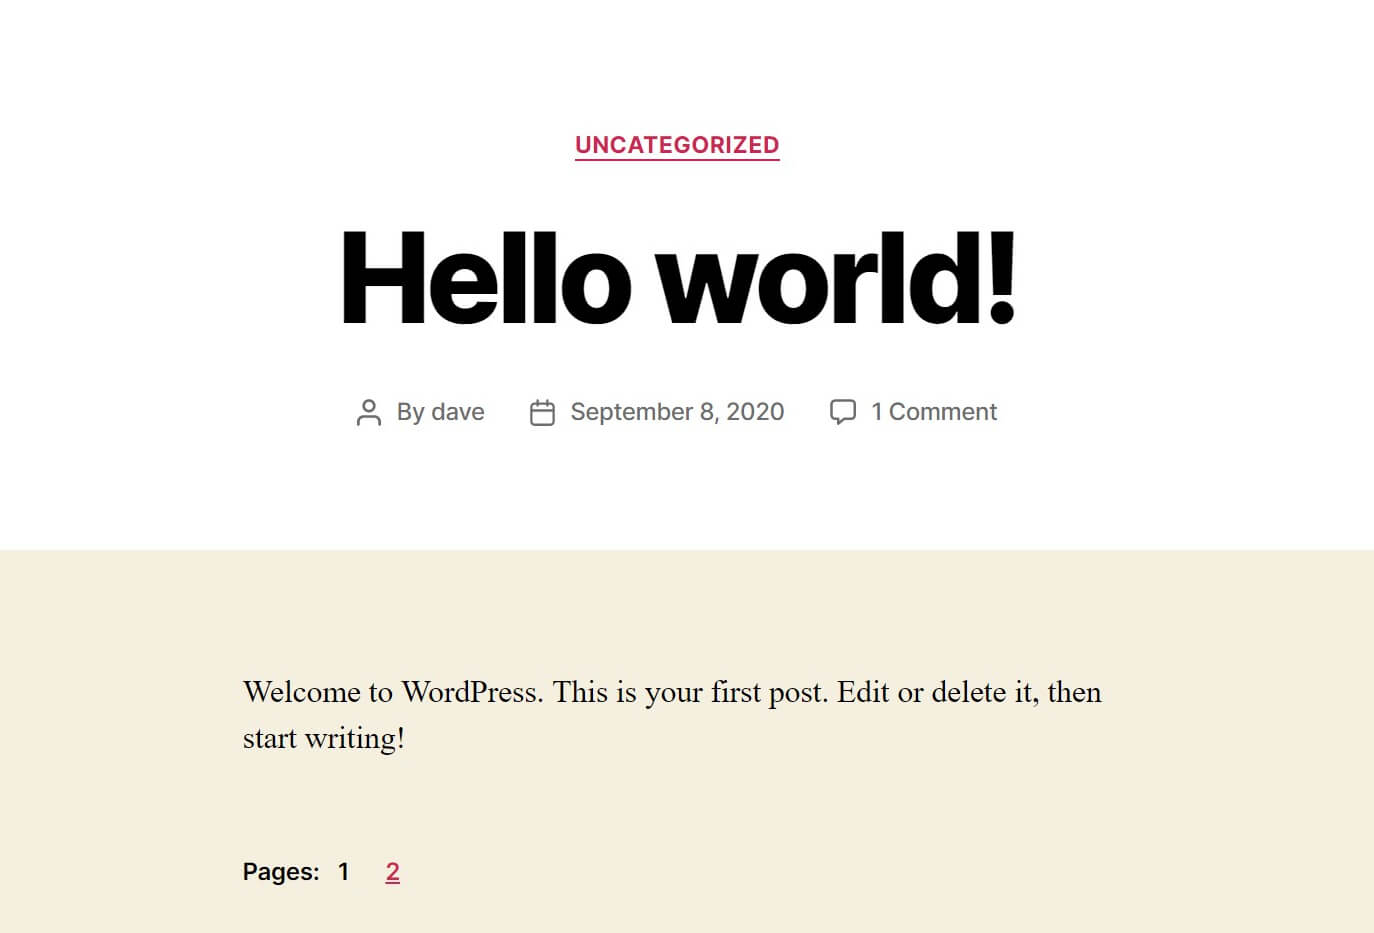 Image of how a paginated post appears in WordPress